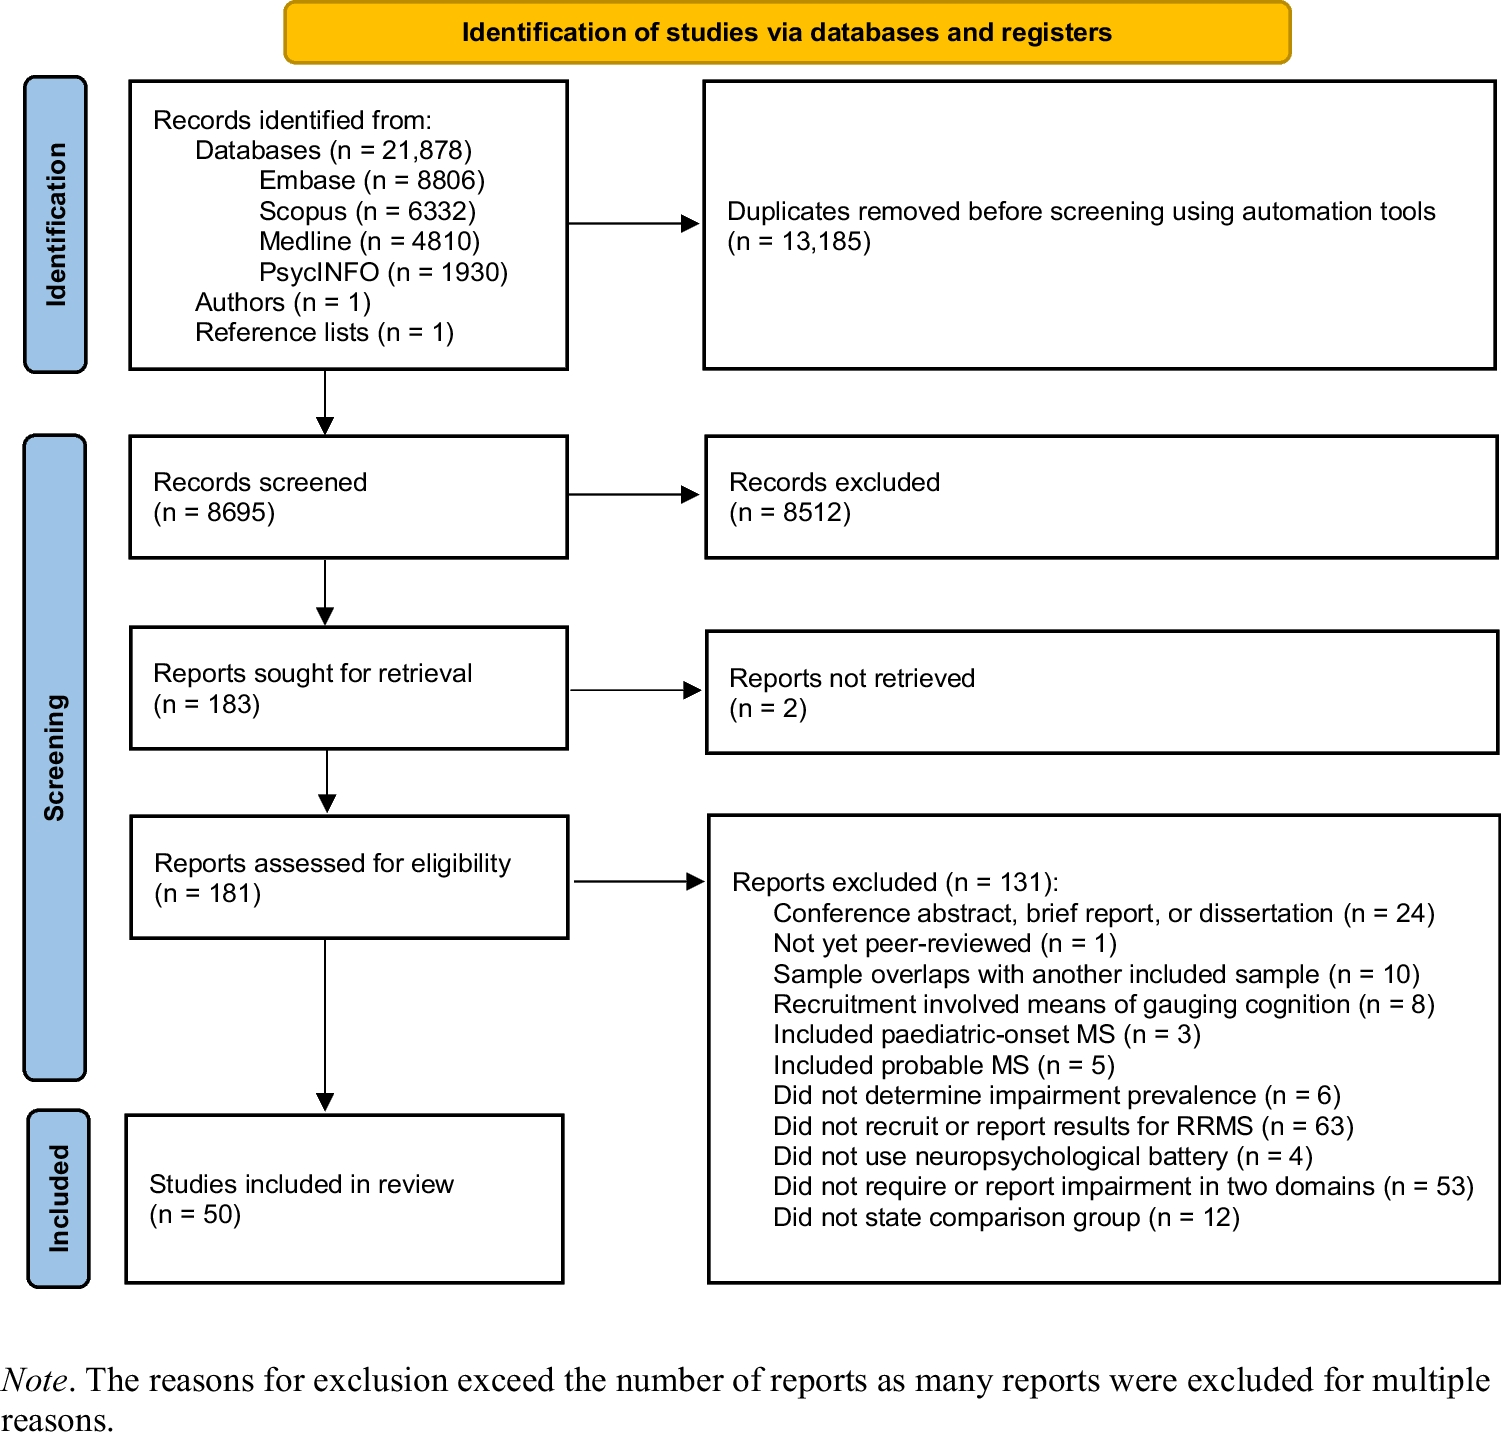 The Prevalence of Cognitive Impairment in Relapsing-Remitting Multiple Sclerosis: A Systematic Review and Meta-analysis